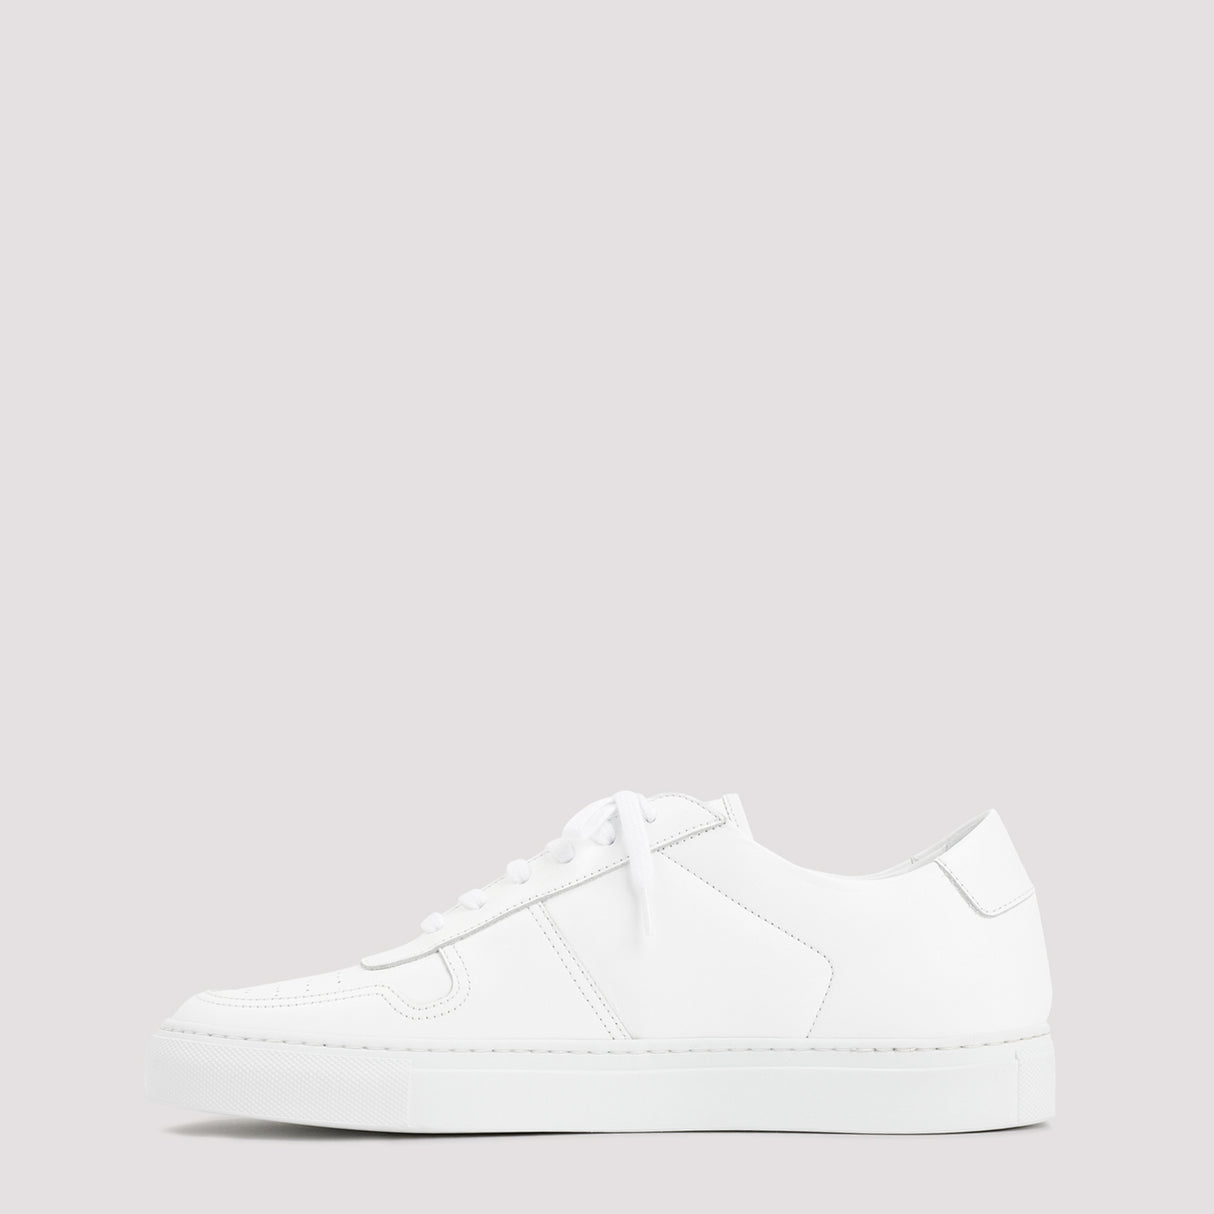 COMMON PROJECTS BBALL LOW Sneaker